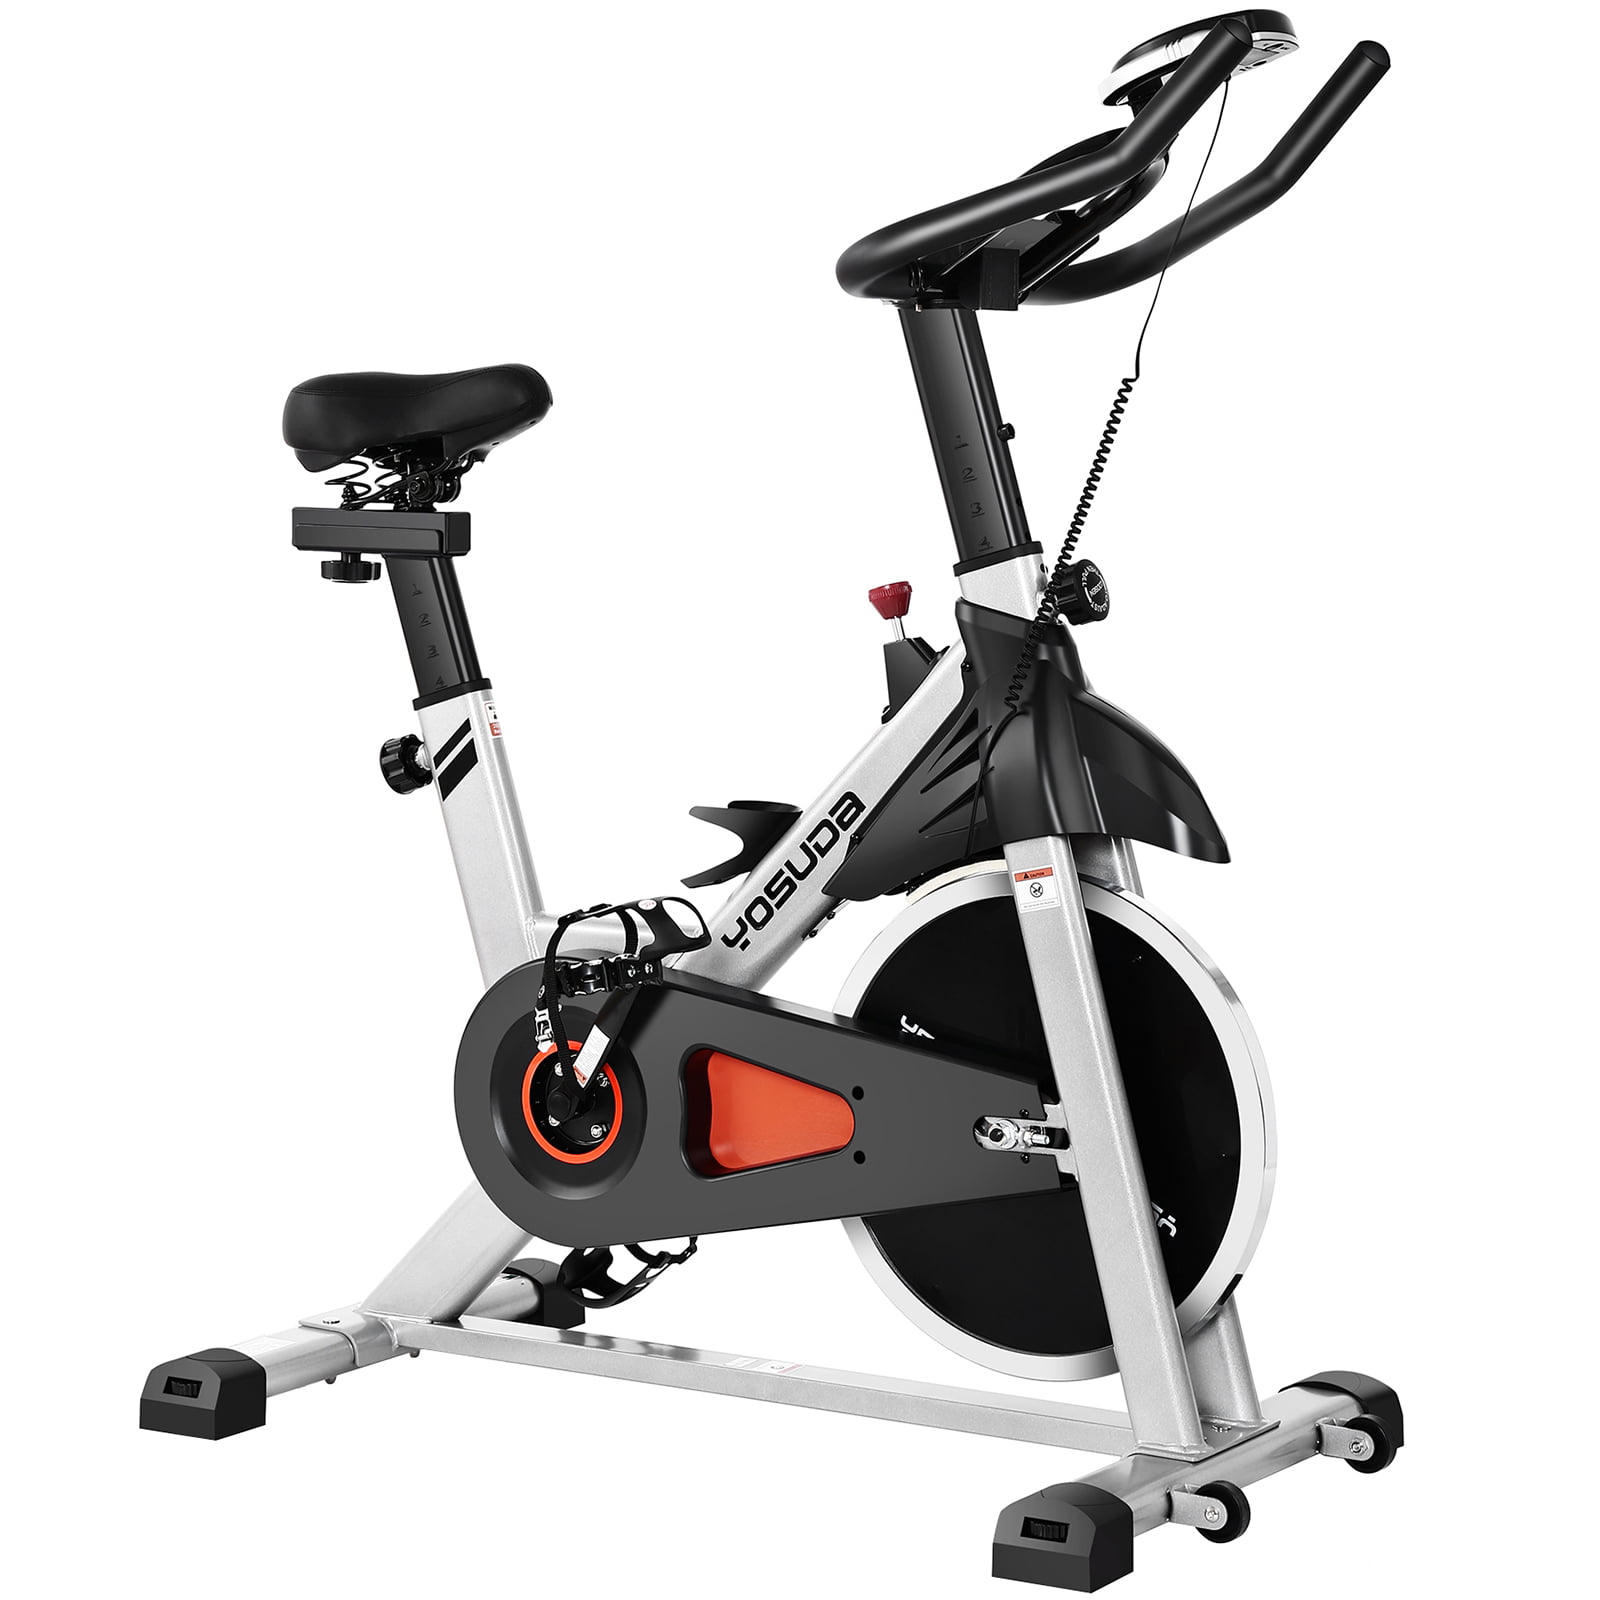 JAJALUYA Exercise Bikes Indoor Cycling Bicycle with Ipad Mount and Comfortable Seat Cushion Stationary Bike with LCD Monitor Silent Spin Cycle Bike for Home Cardio Gym 